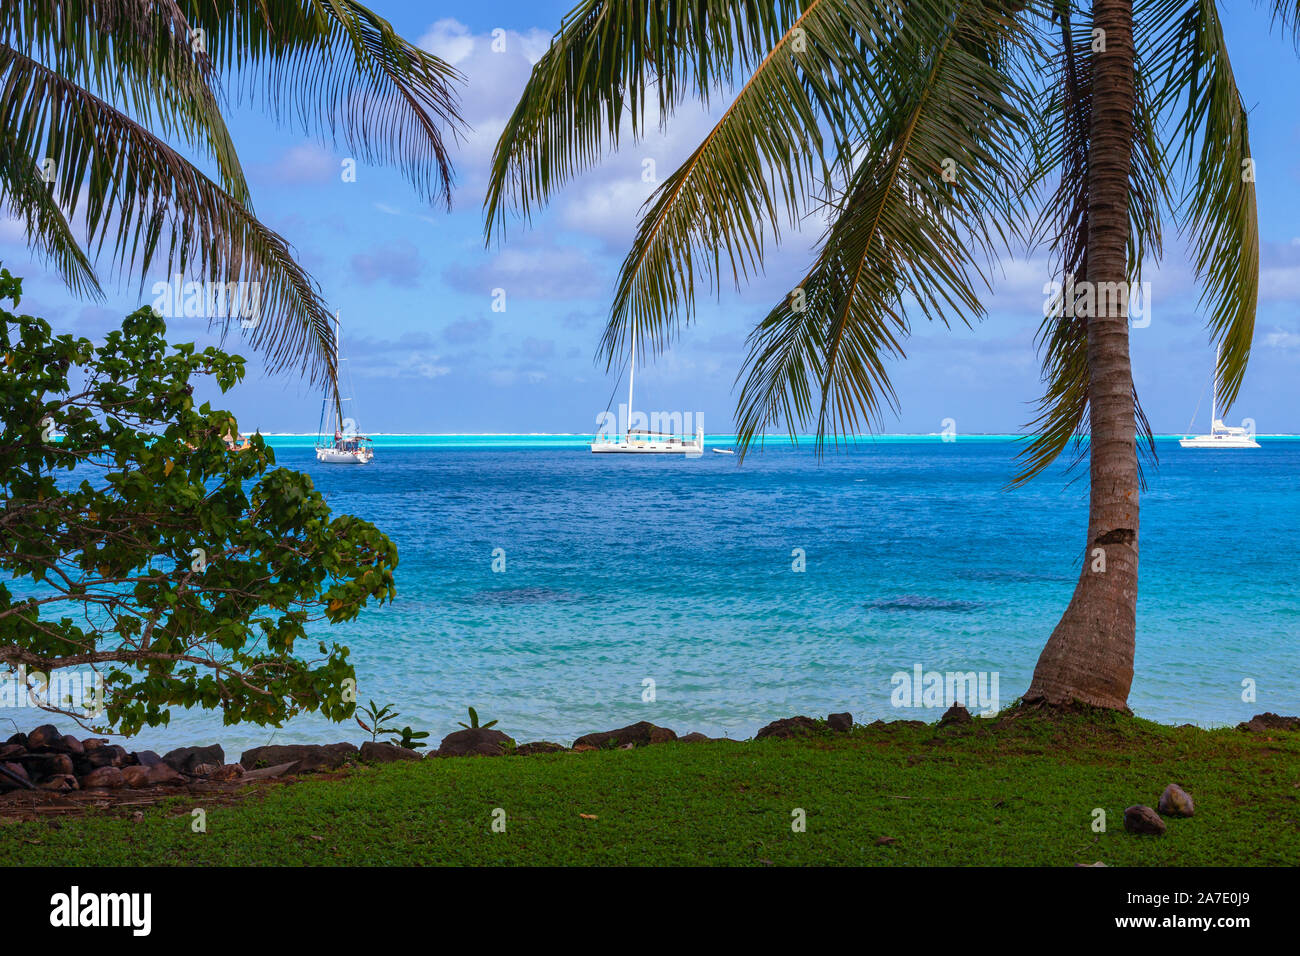 A view of the bay through palm trees,Huahine, French Polynesia in the South Pacific Stock Photo